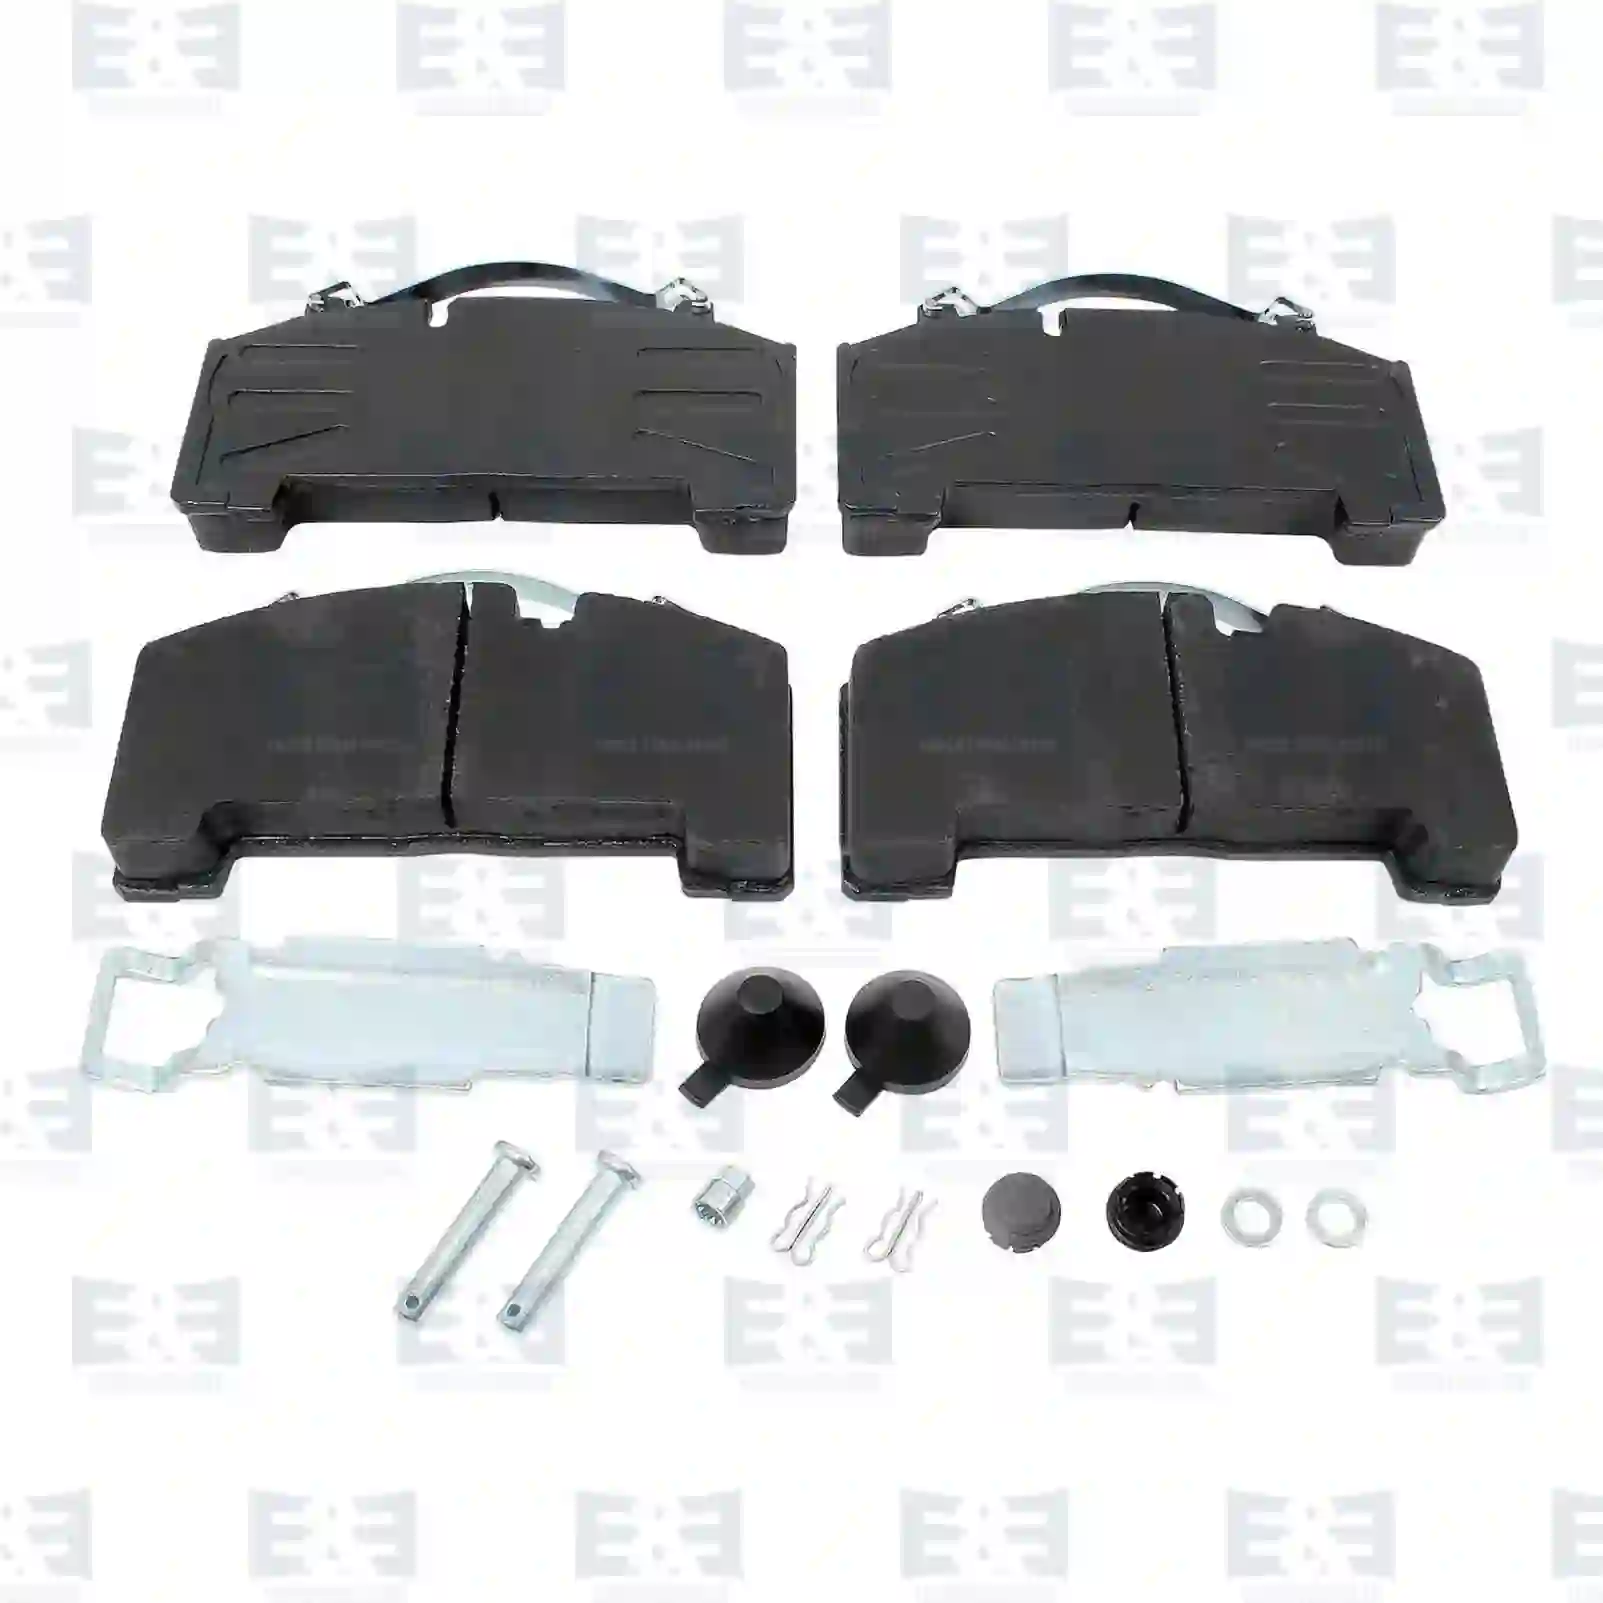 Brake Disc Disc brake pad kit, with accessory kit, EE No 2E2297488 ,  oem no:0509290060, 0509290080, 0509290230, 0980106440, 0980106950, 0980107260, 1529339, 1534092, 1534096, 1961736, 1962431, 908336, JAE0250407020, JAE0250437020, 6500489, 0044207020, K00627, MDP3171K, 3057008500, 3057008501, 1748114, 2198229, 2198237, 2339722, 1005625, 1008452, 1105625, 1161563, ZG50434-0008 E&E Truck Spare Parts | Truck Spare Parts, Auotomotive Spare Parts